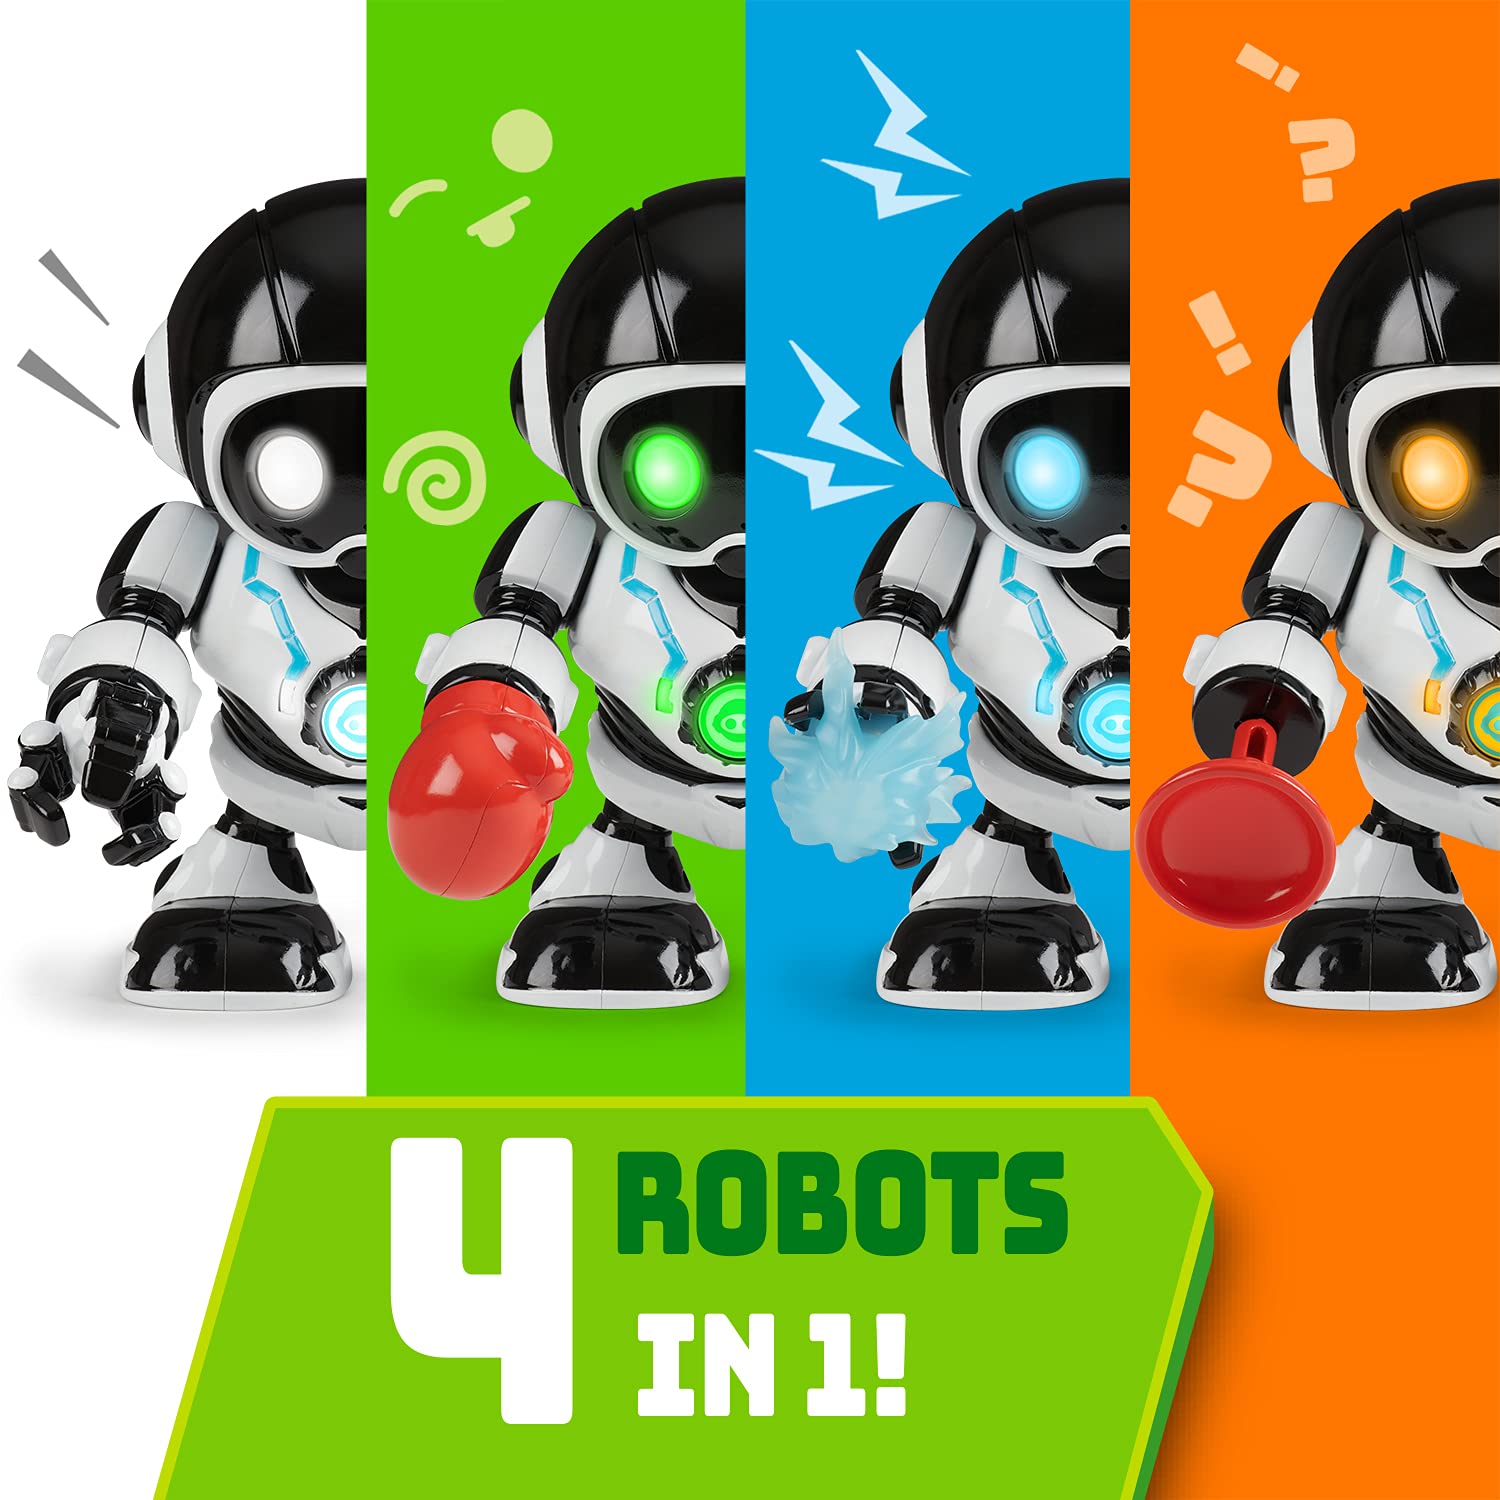 WowWee Robosapien Remix - 4 Robots in 1 - with 4 Arm Launchers